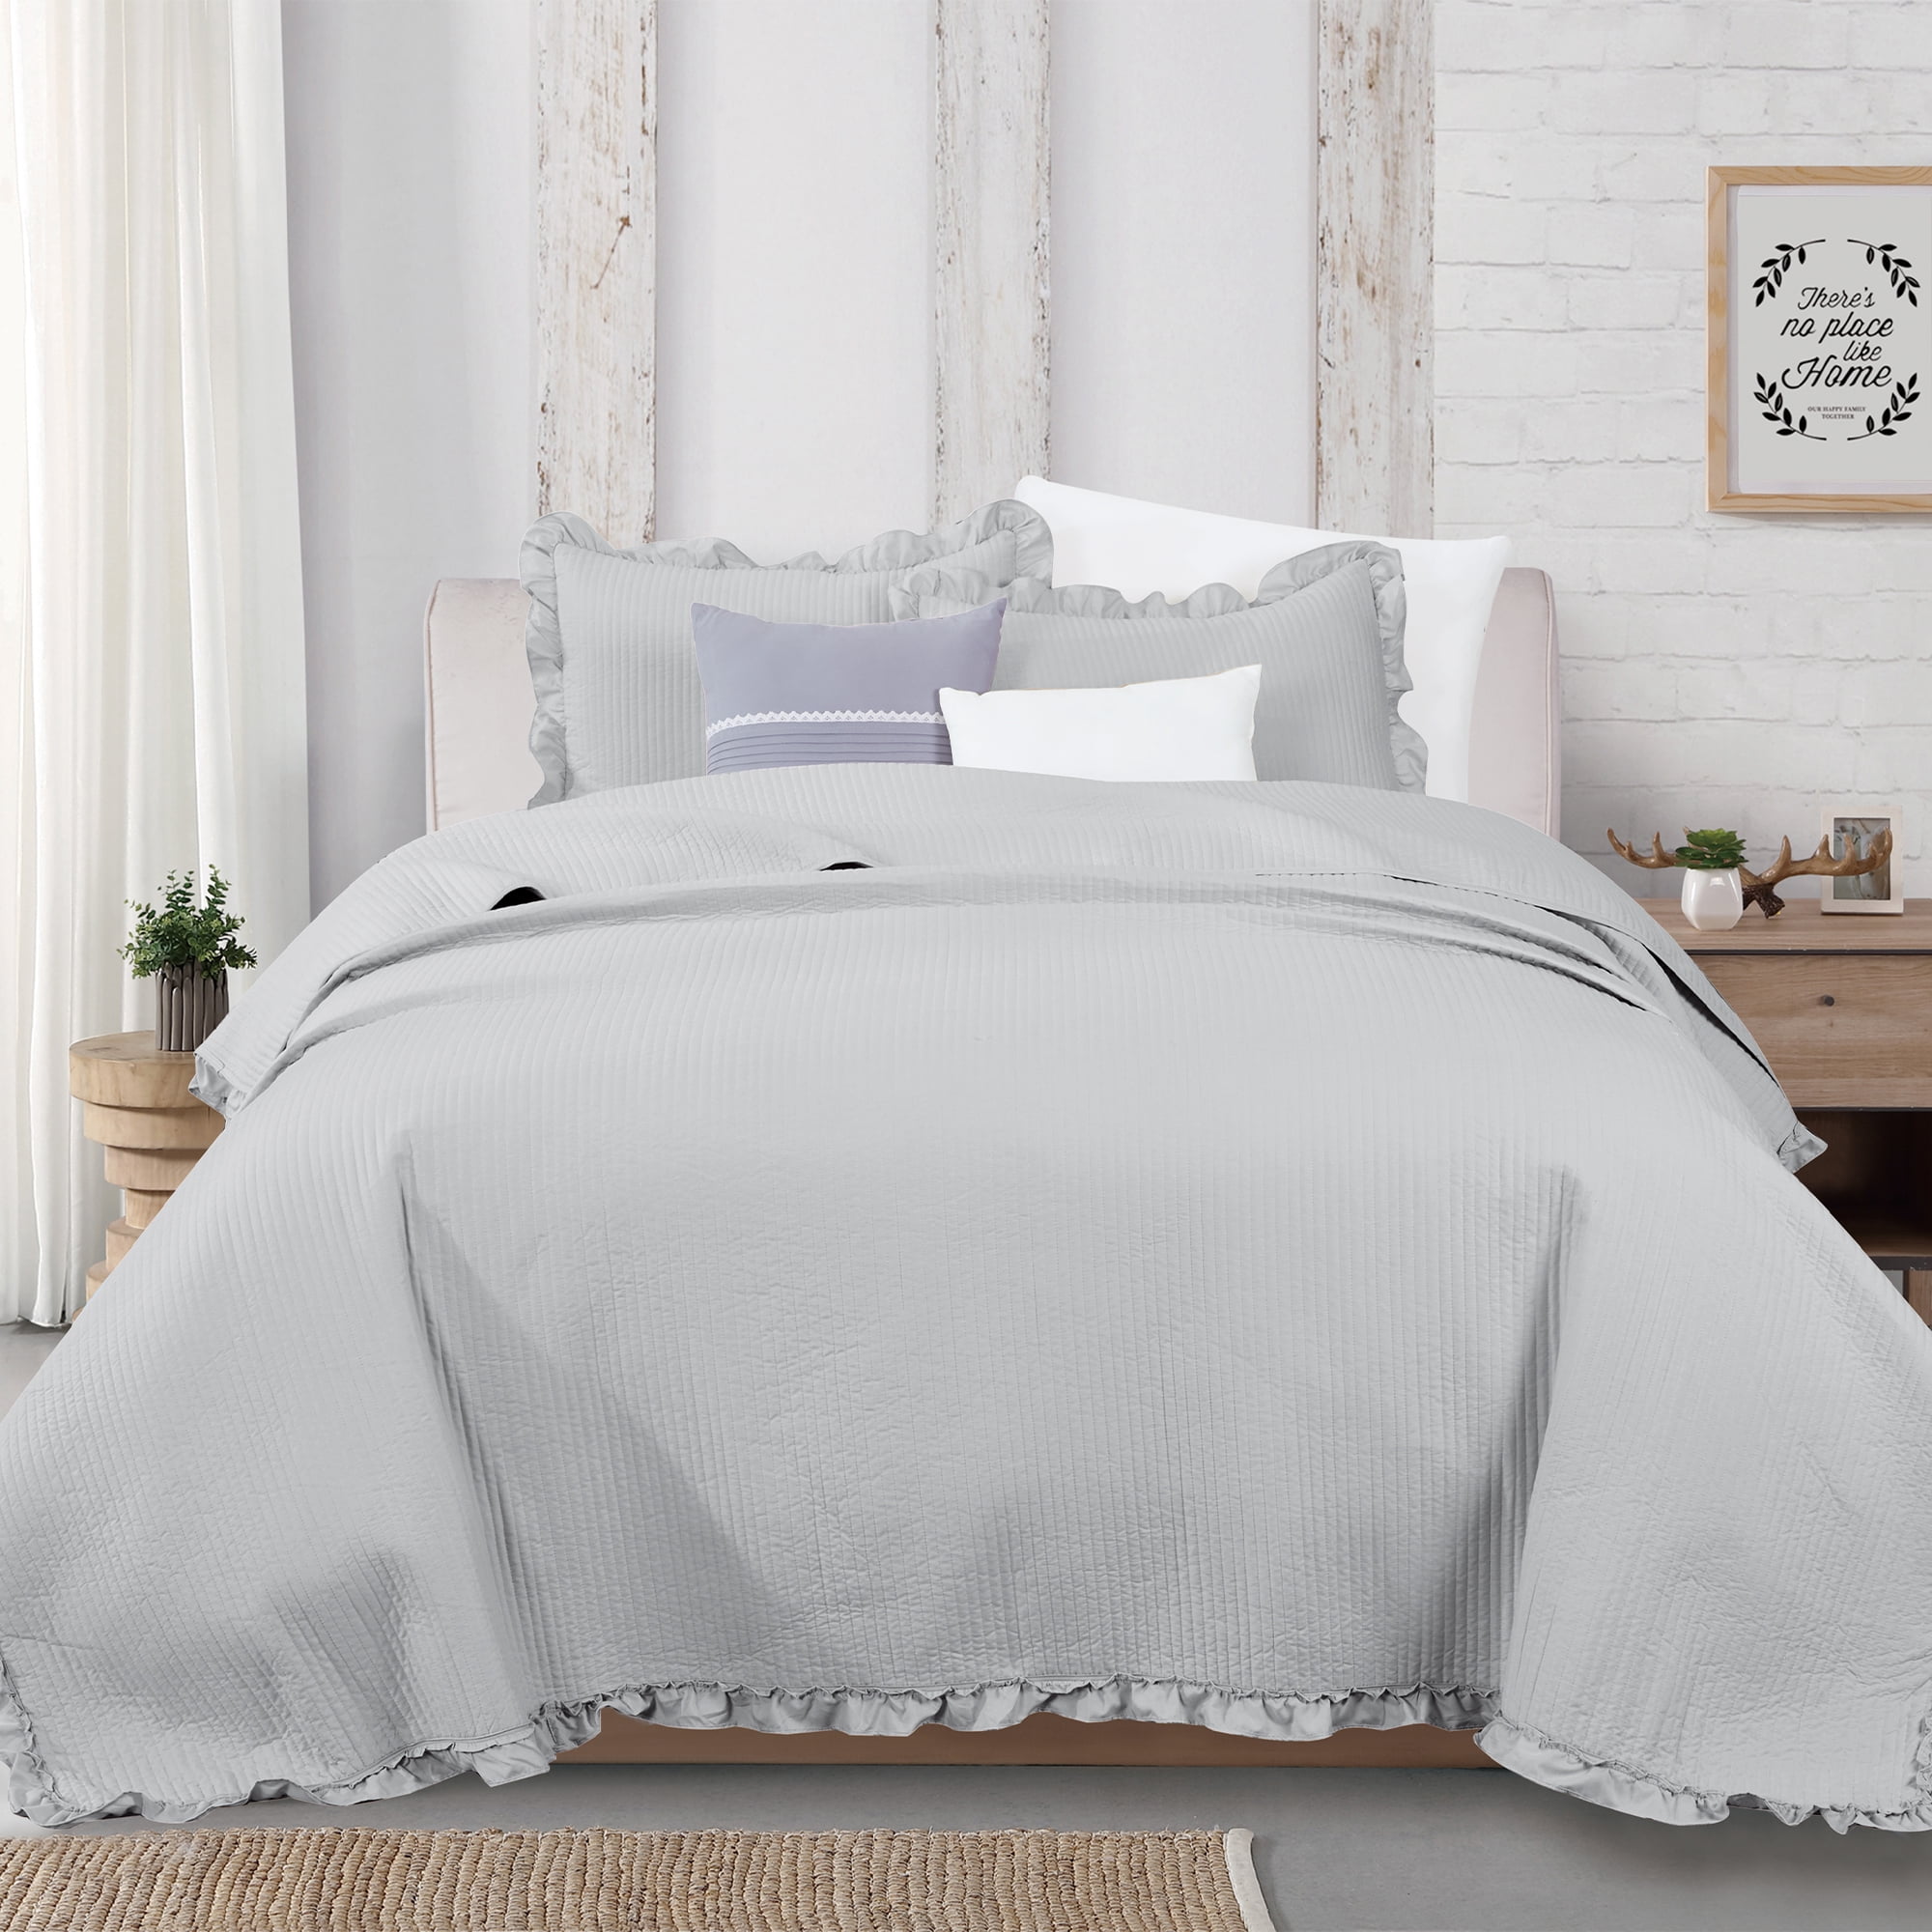 WHITE QUILT COVER King Size Charcoal Trim Doona Duvet Cover Set AVA COLLECTION 